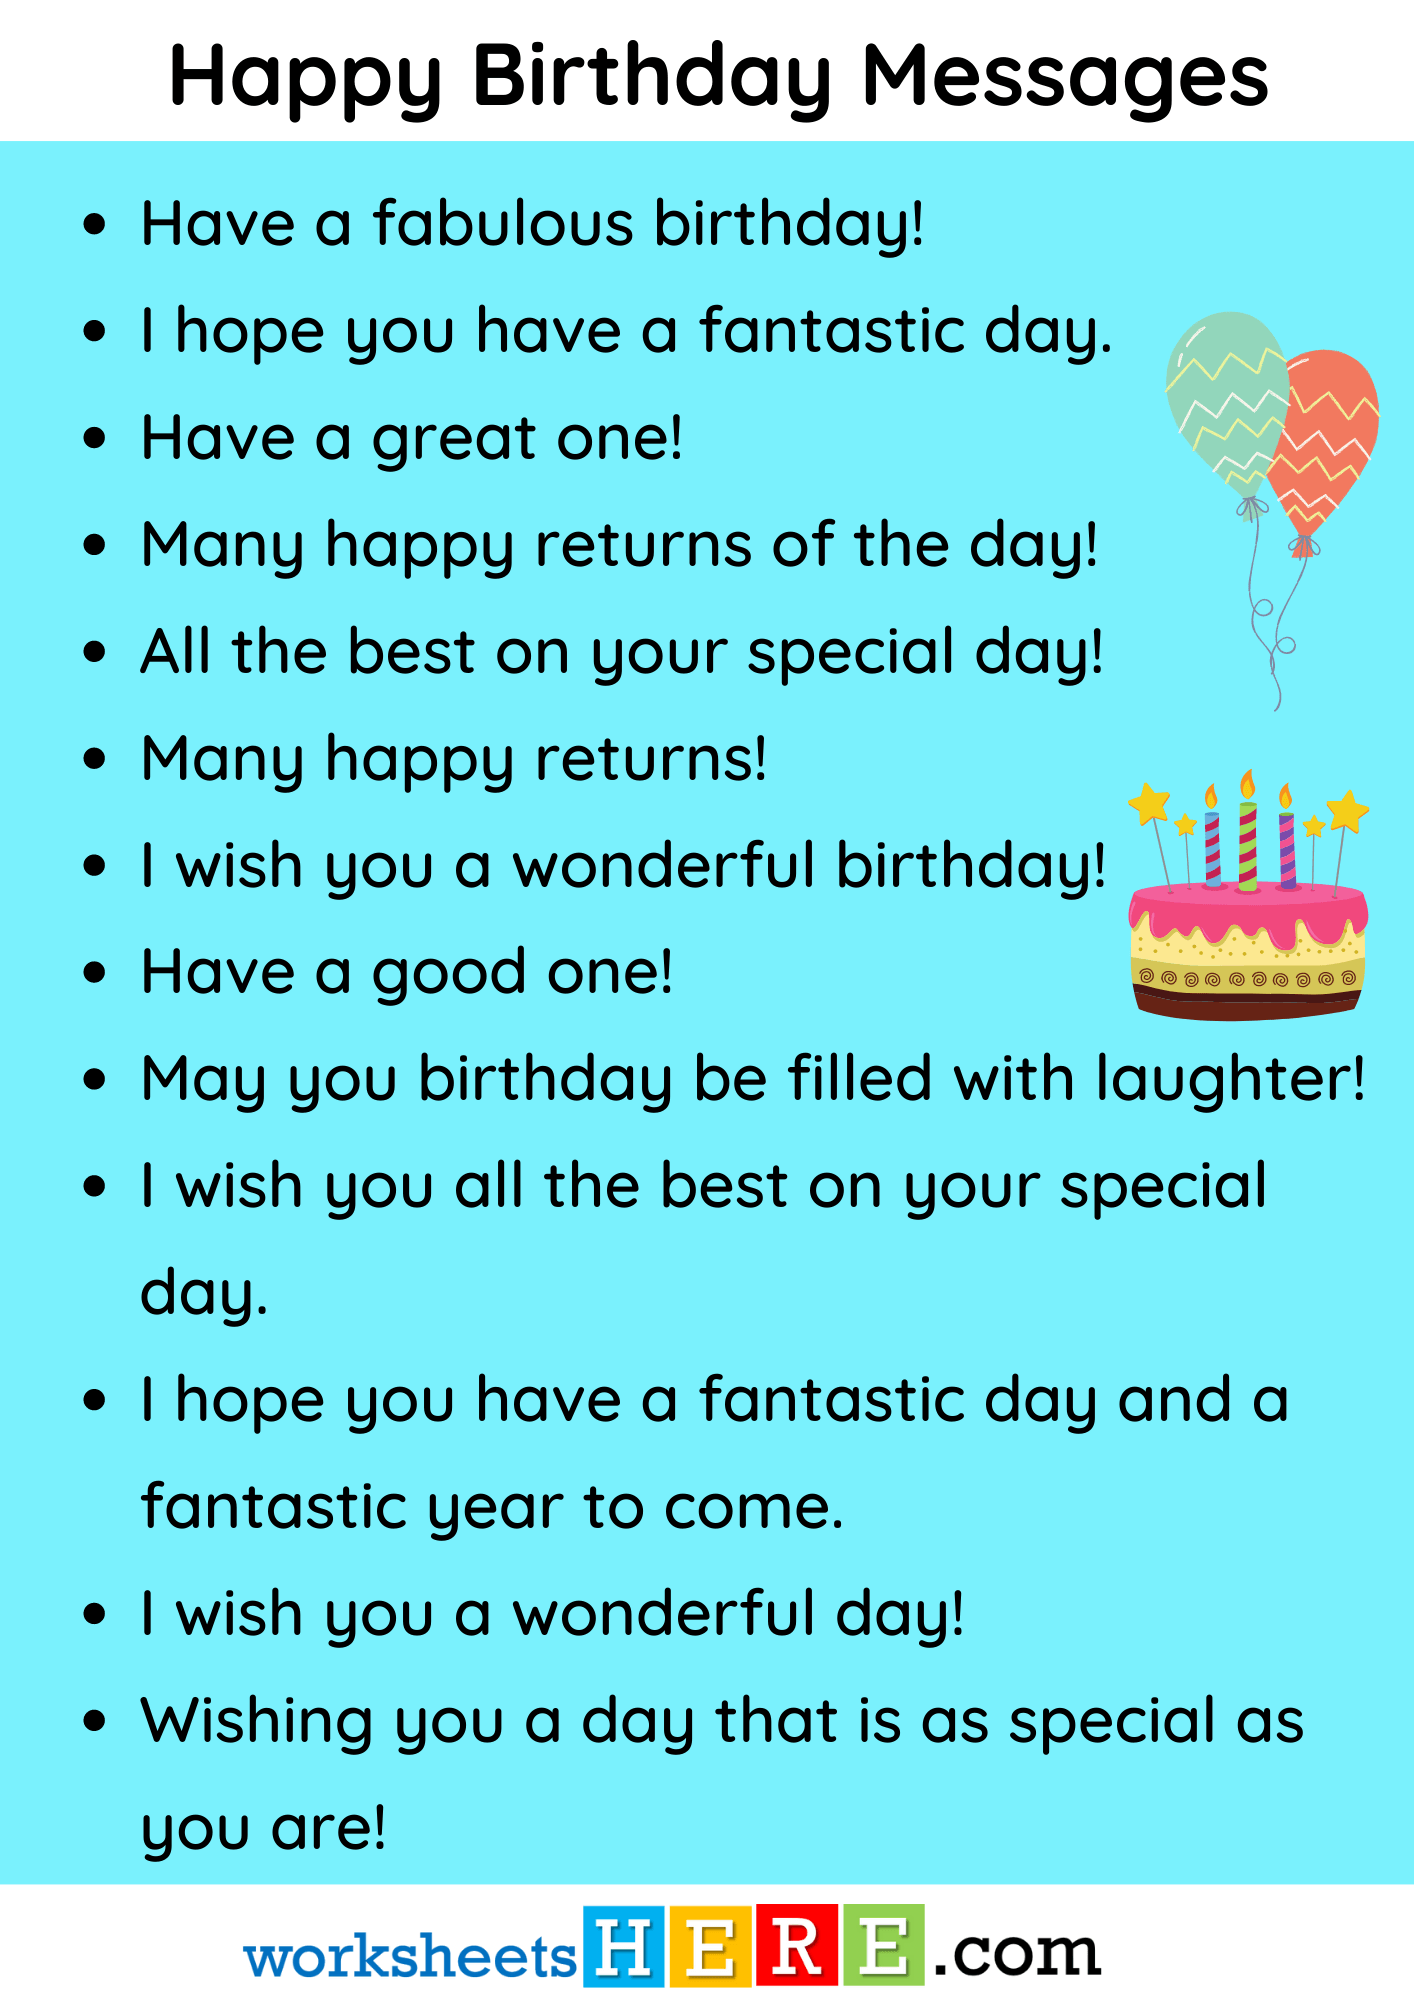 Happy Birthday Messages Phrases Examples PDF Worksheet For Students and Kids